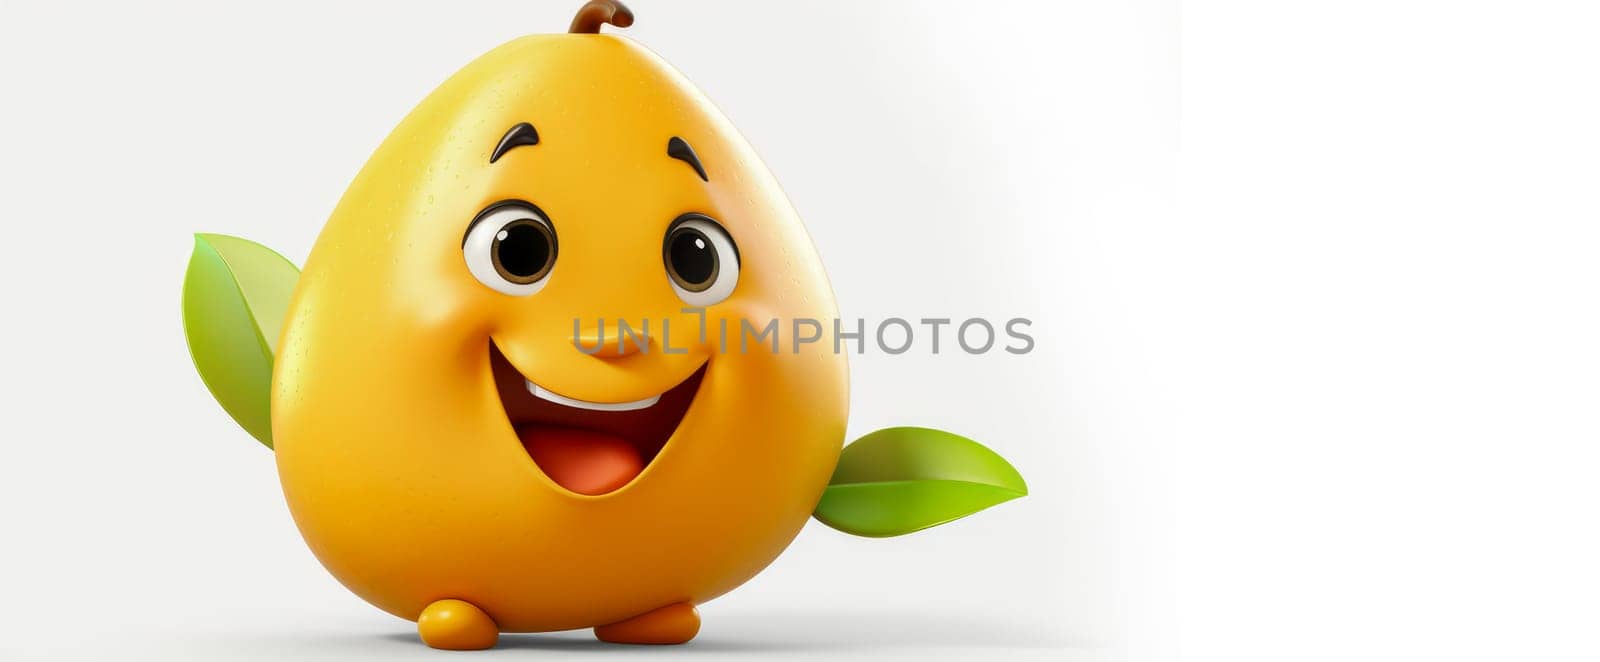 Orange mango with a cheerful face 3D on a white background. by Alla_Yurtayeva